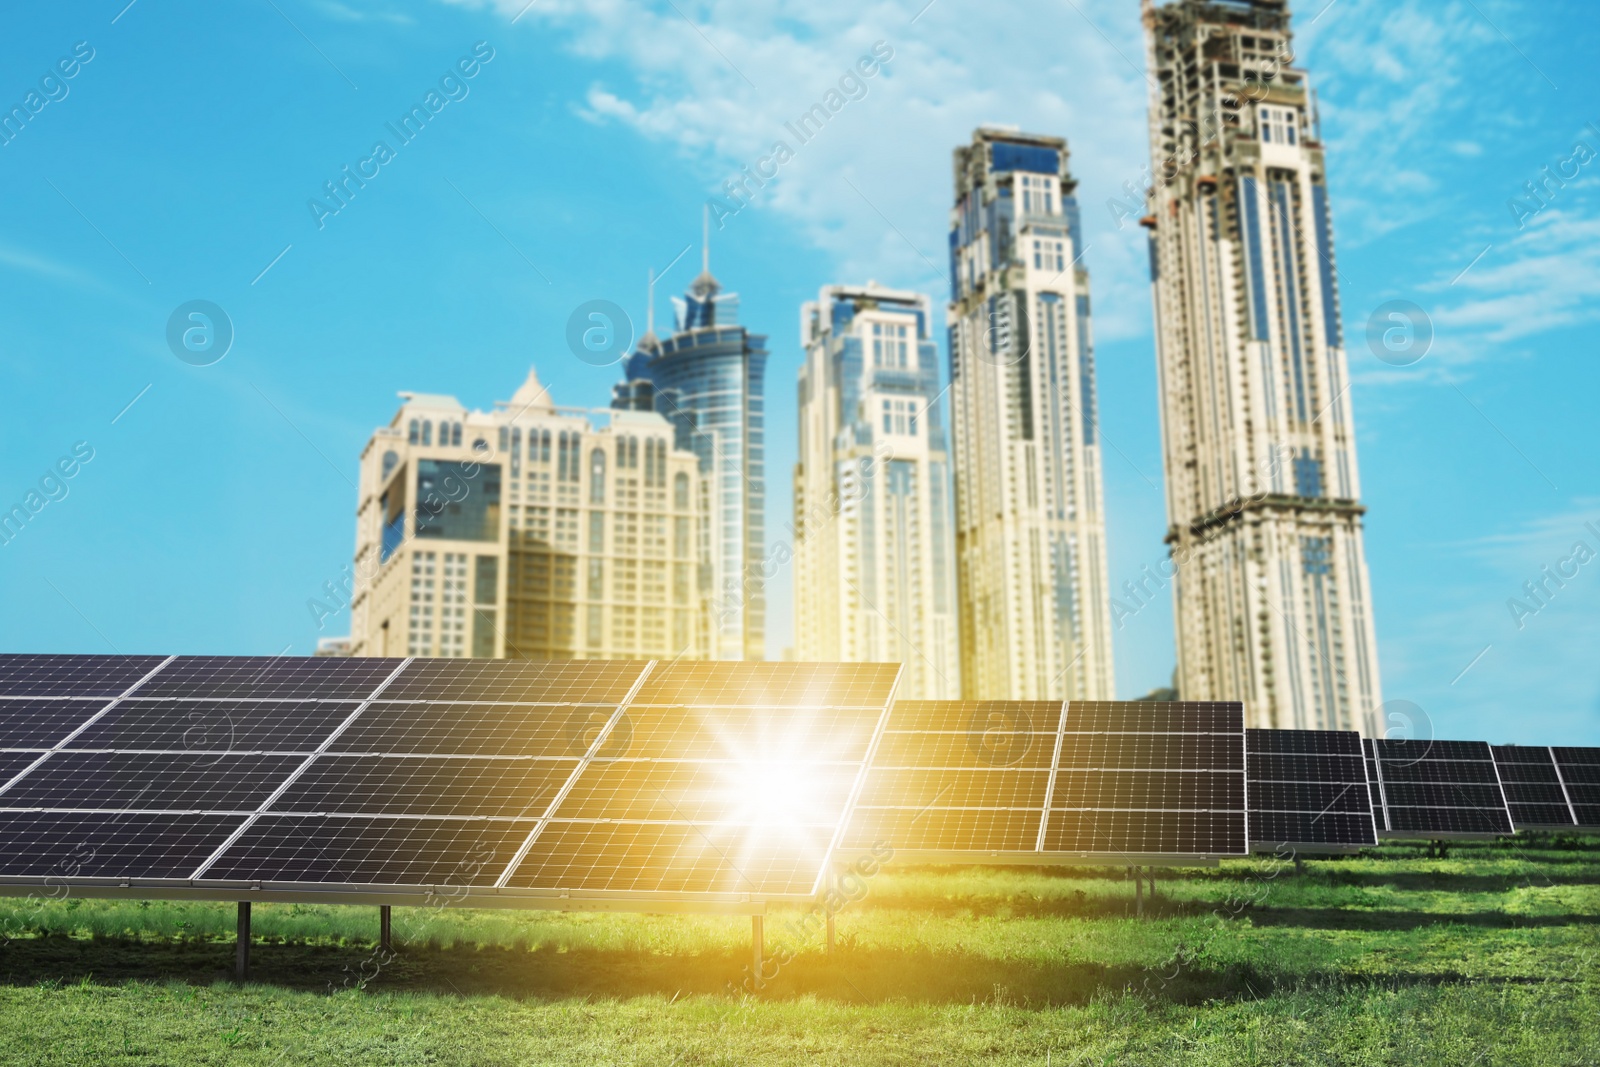 Image of Cityscape and solar panels installed outdoors. Alternative energy source